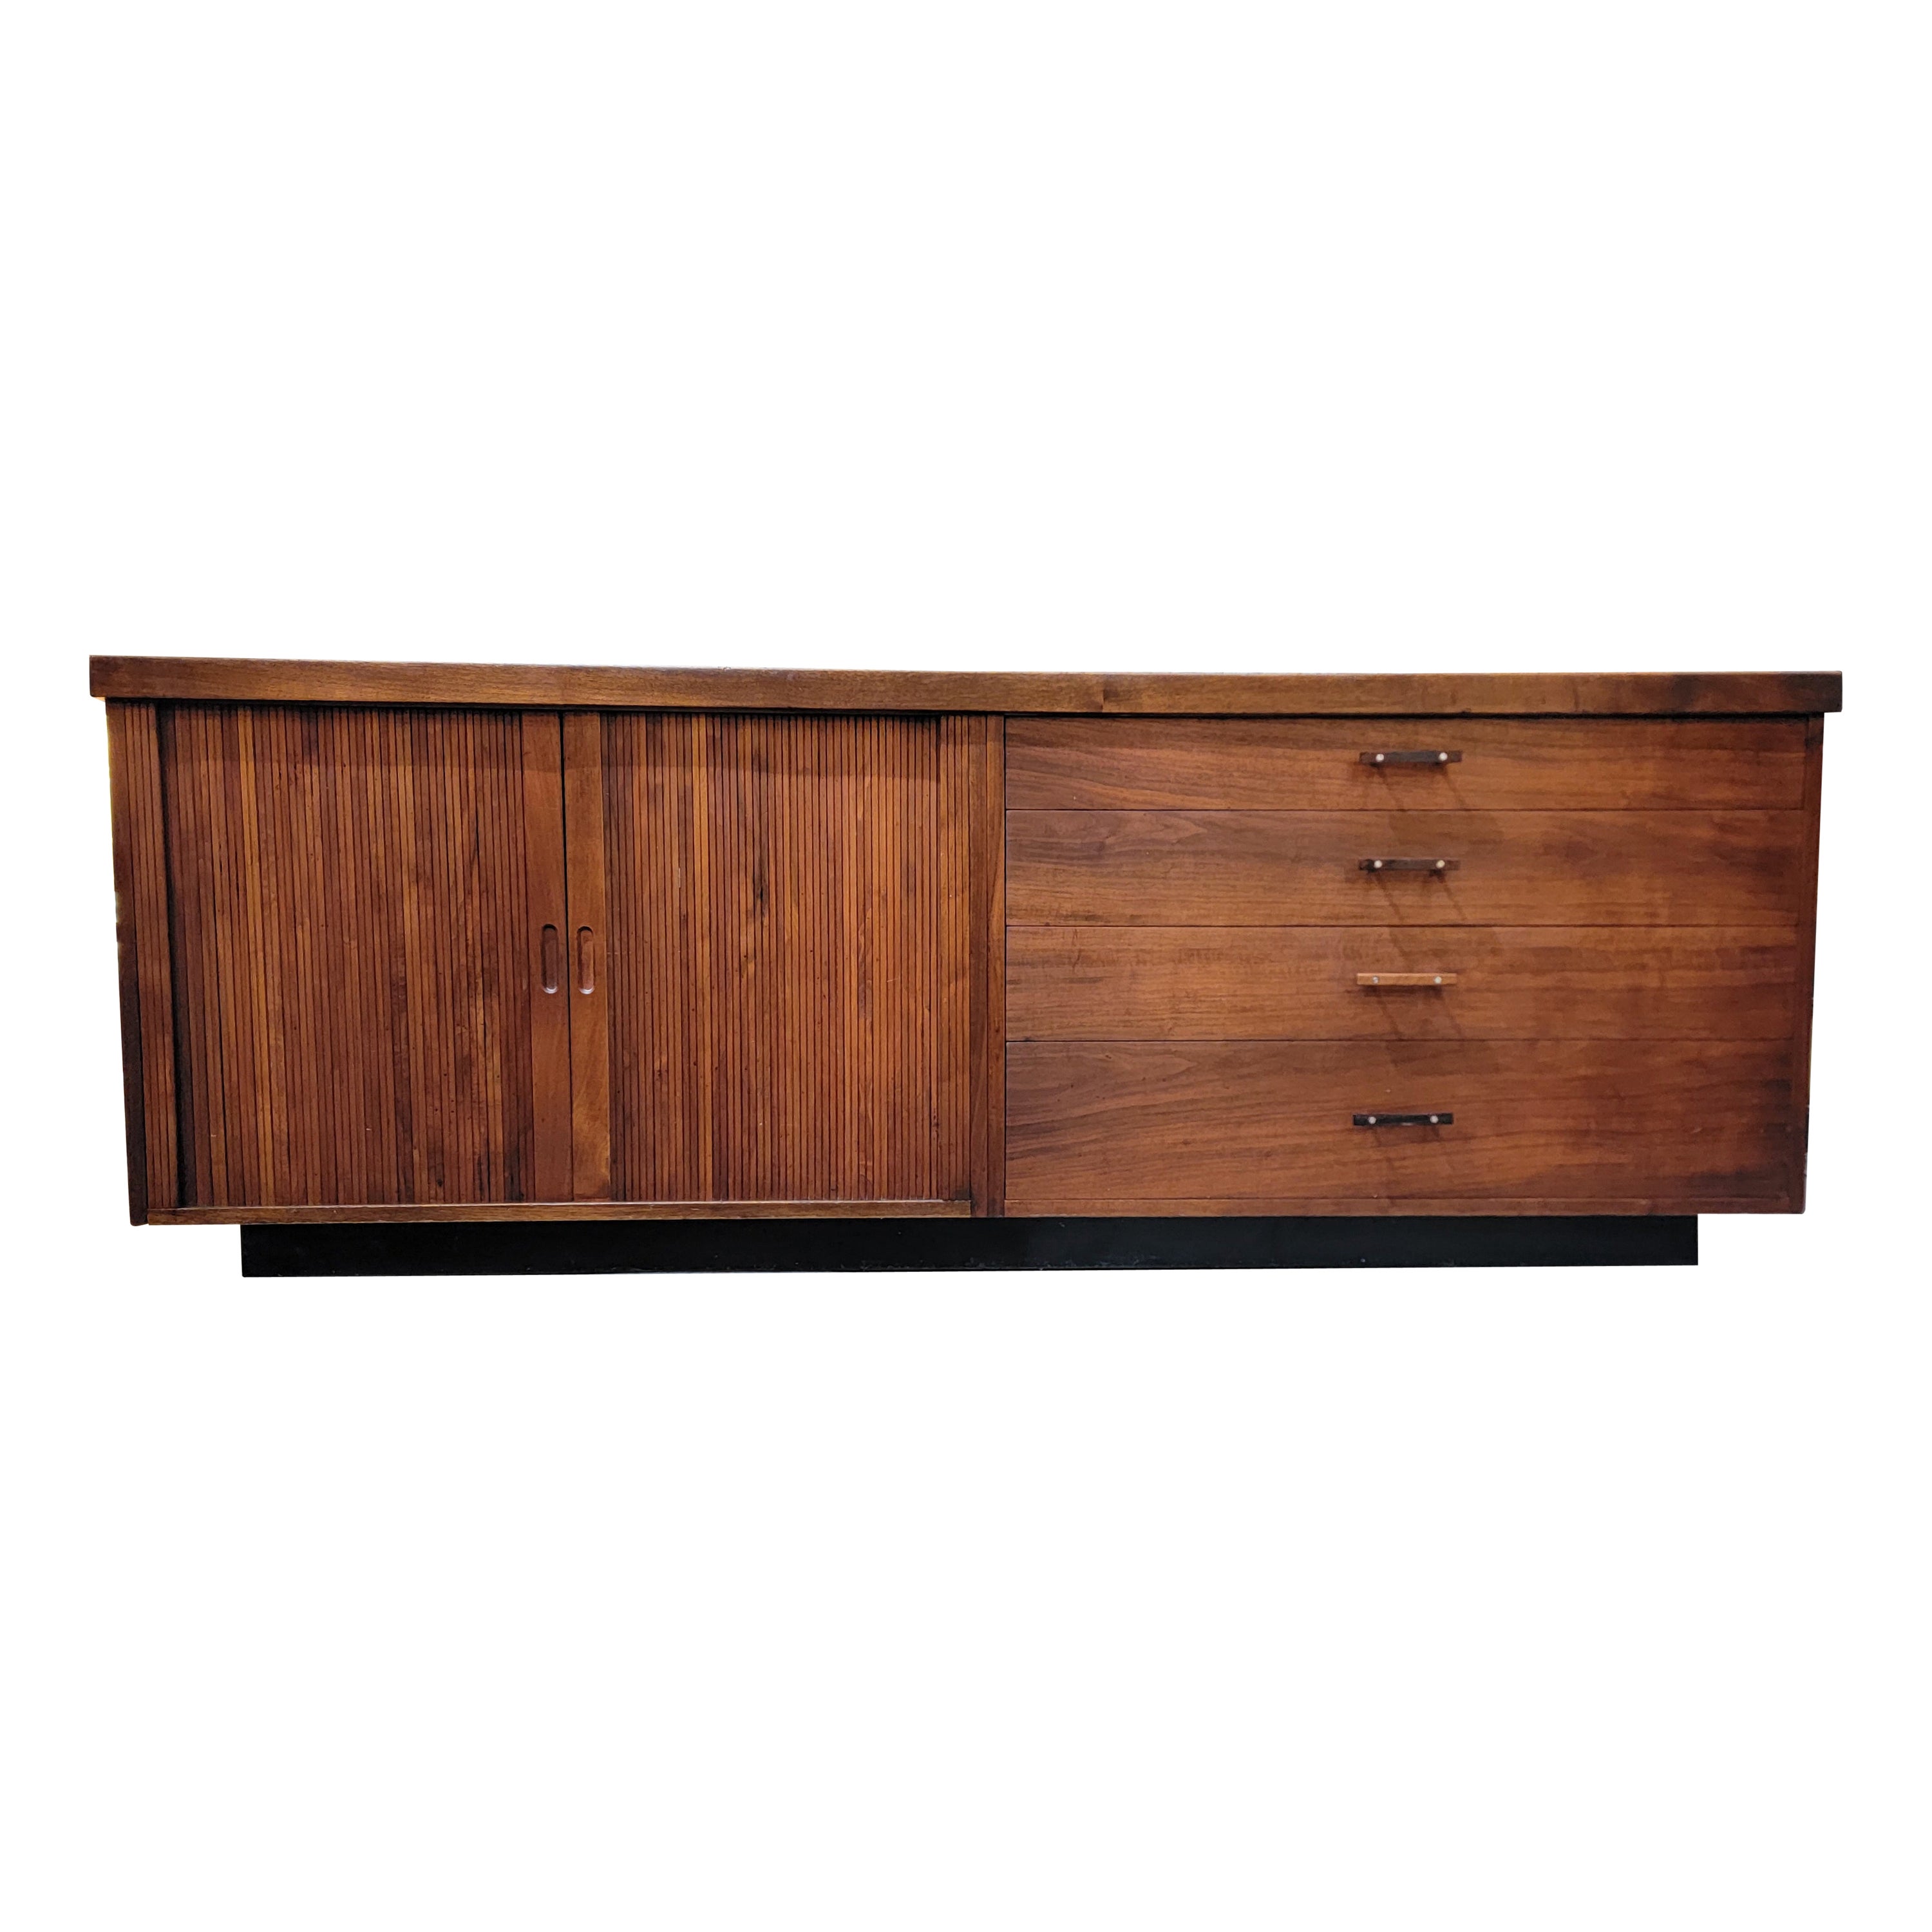 Tambour Door Credenza by Milo Baughman for Glenn of California For Sale